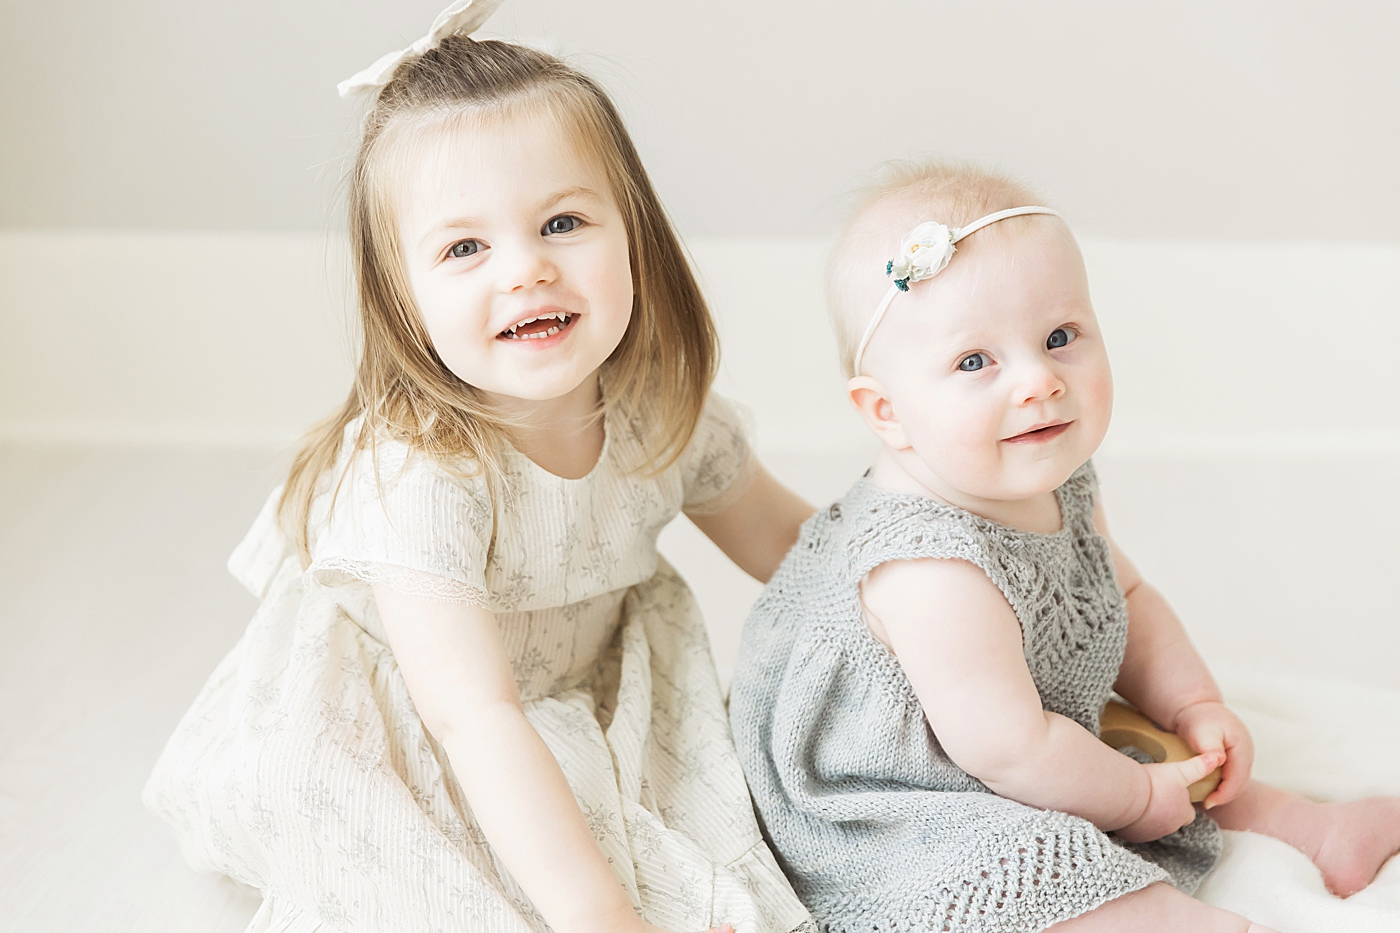 Big sister and little sister sitting together. Photos by Fresh Light Photography.